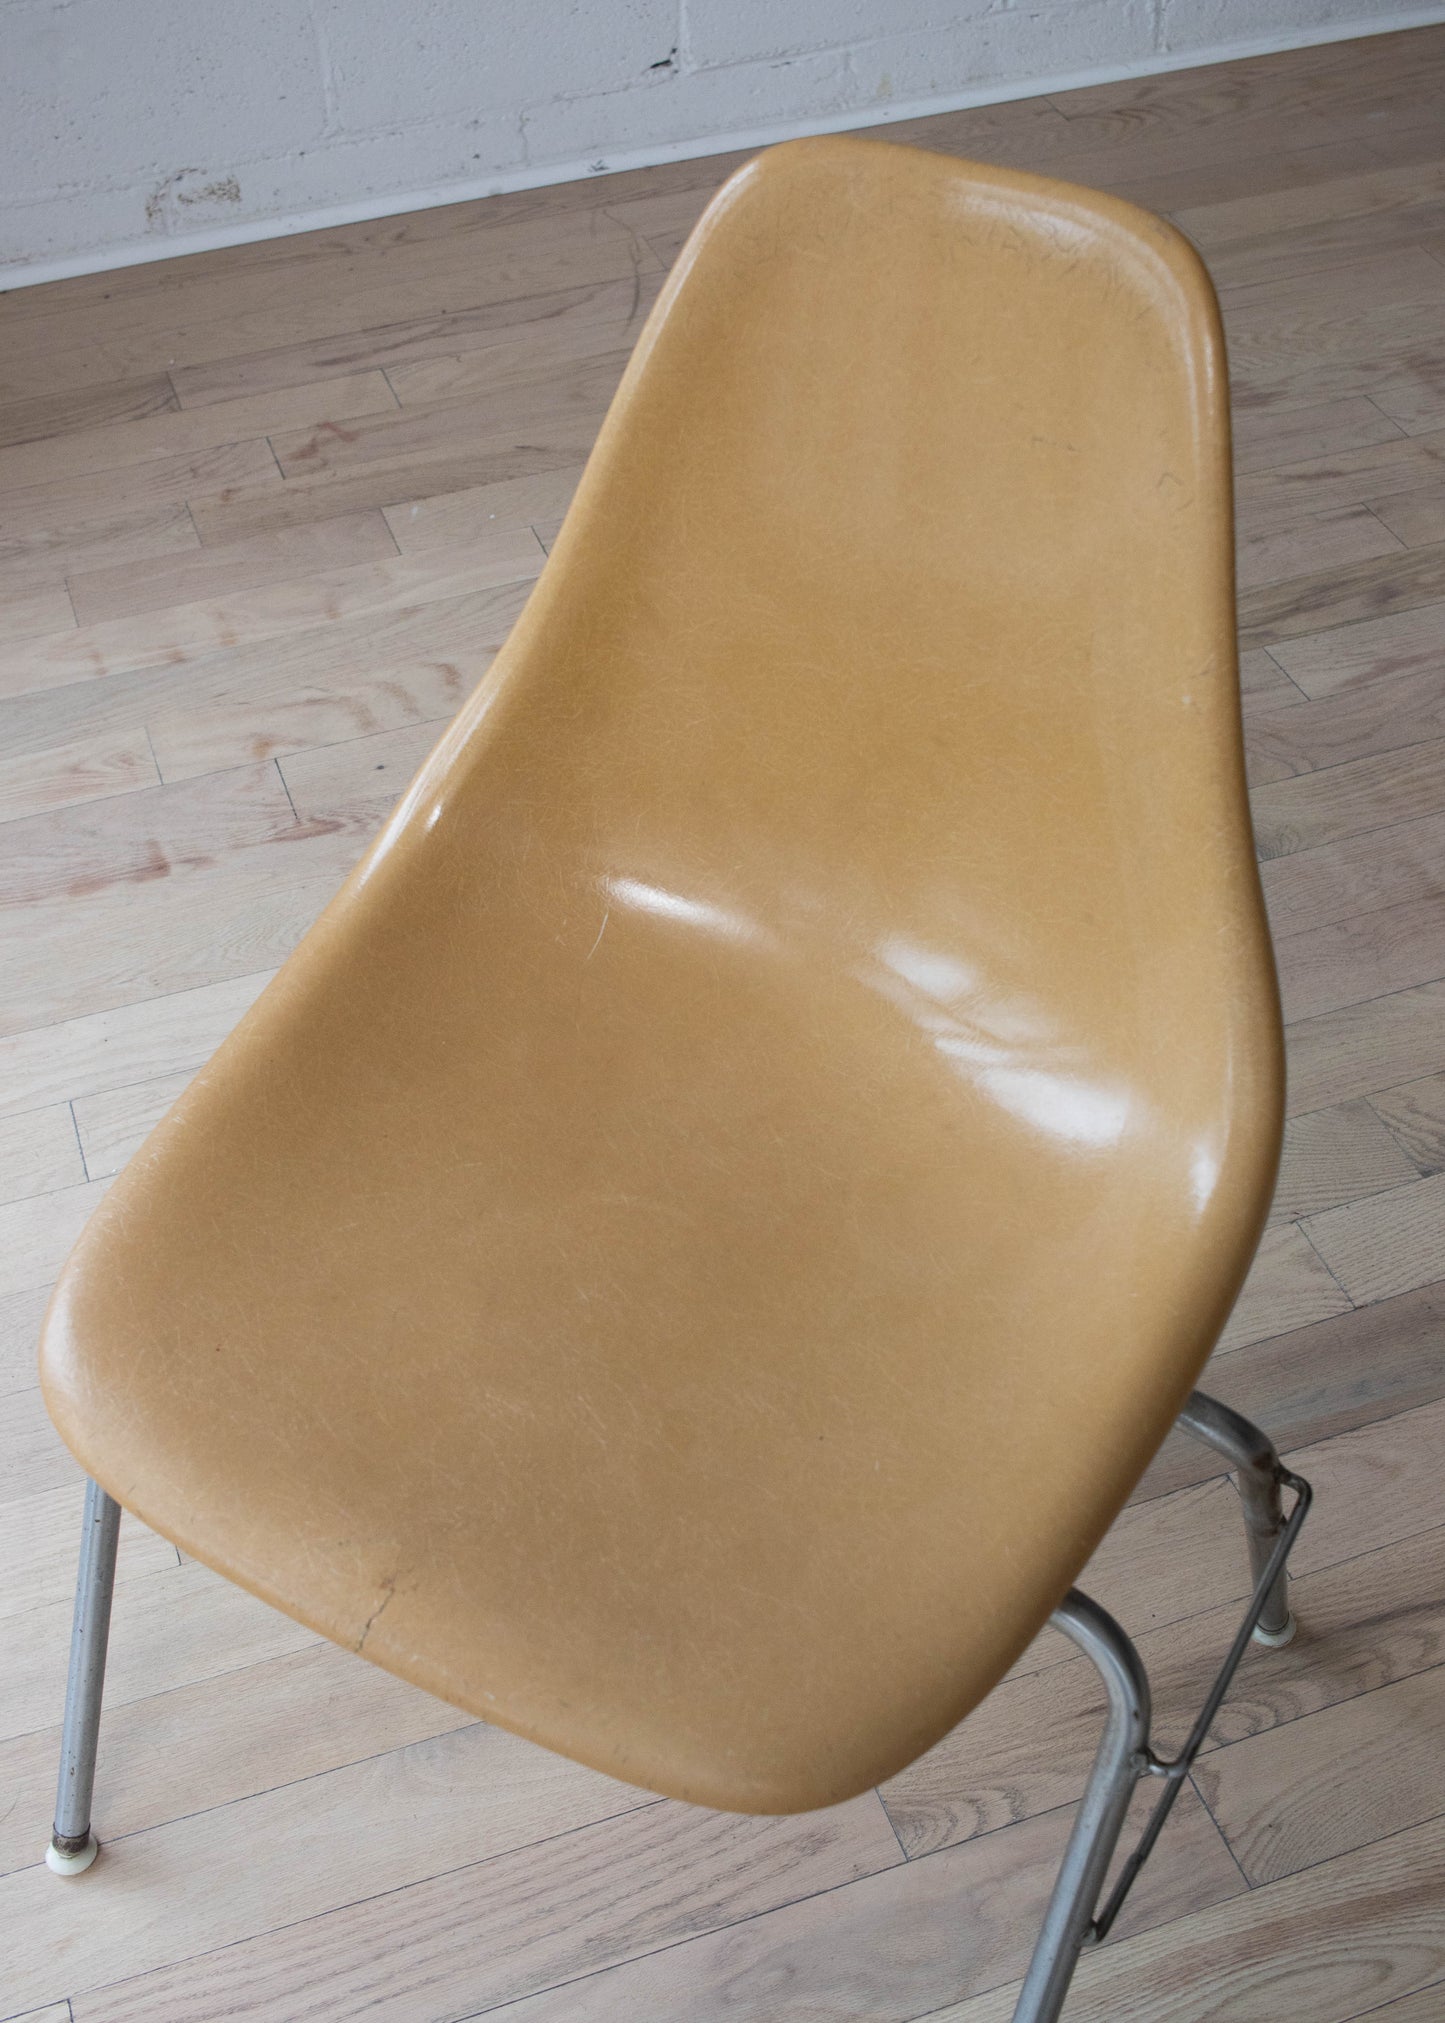 Vintage 1970s/1980s CSC Fiberglass Stacking Chair